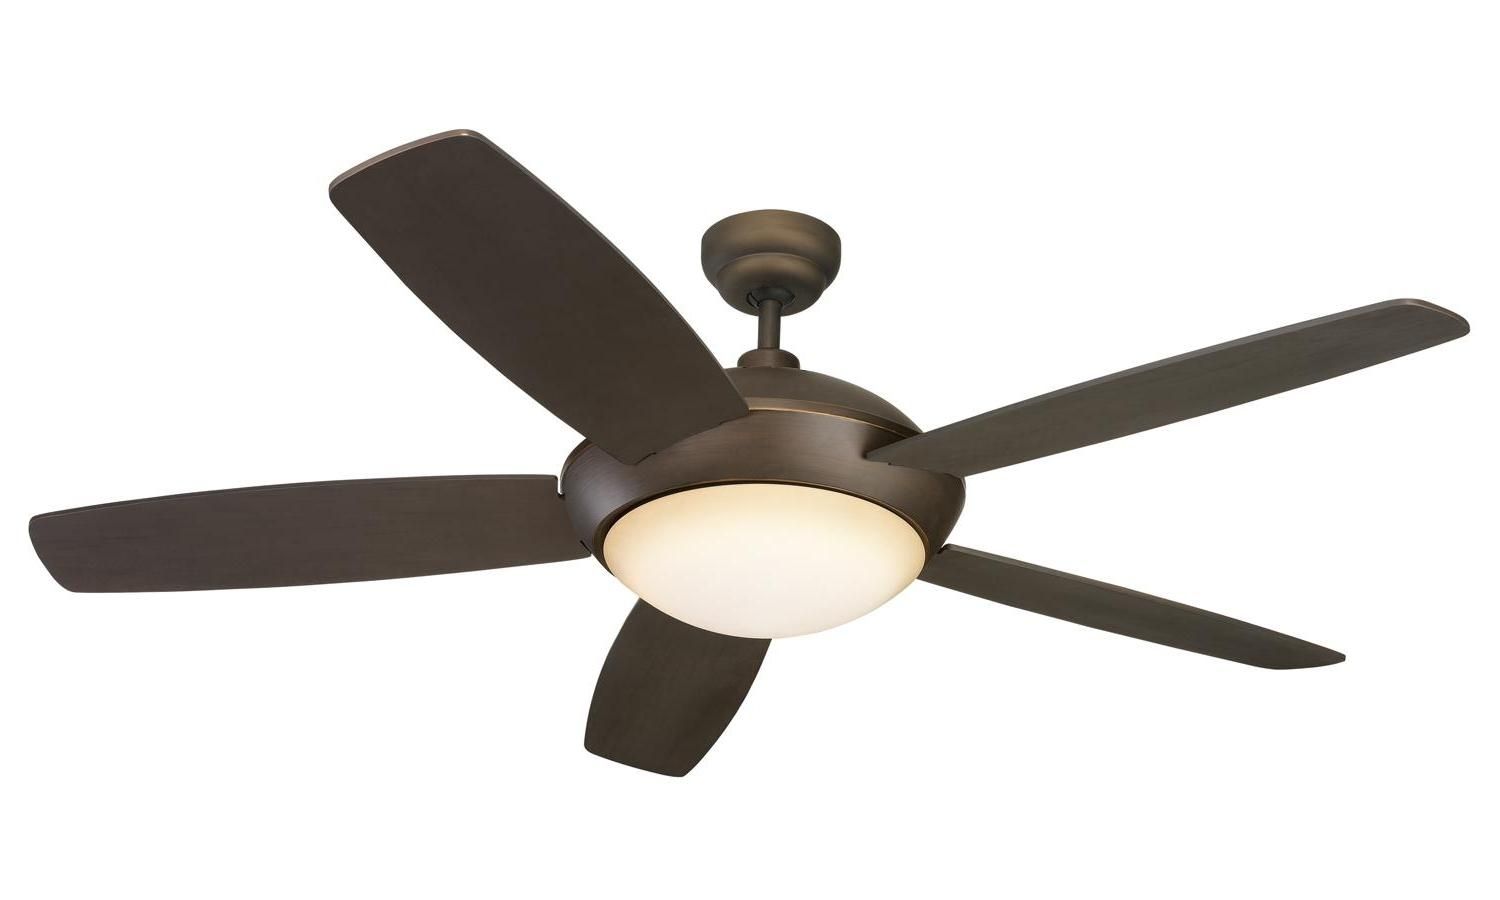 Outdoor Ceiling Fans With Lights And Remote Control • Outdoor Lighting Throughout Outdoor Ceiling Fans With Remote Control Lights (View 11 of 15)